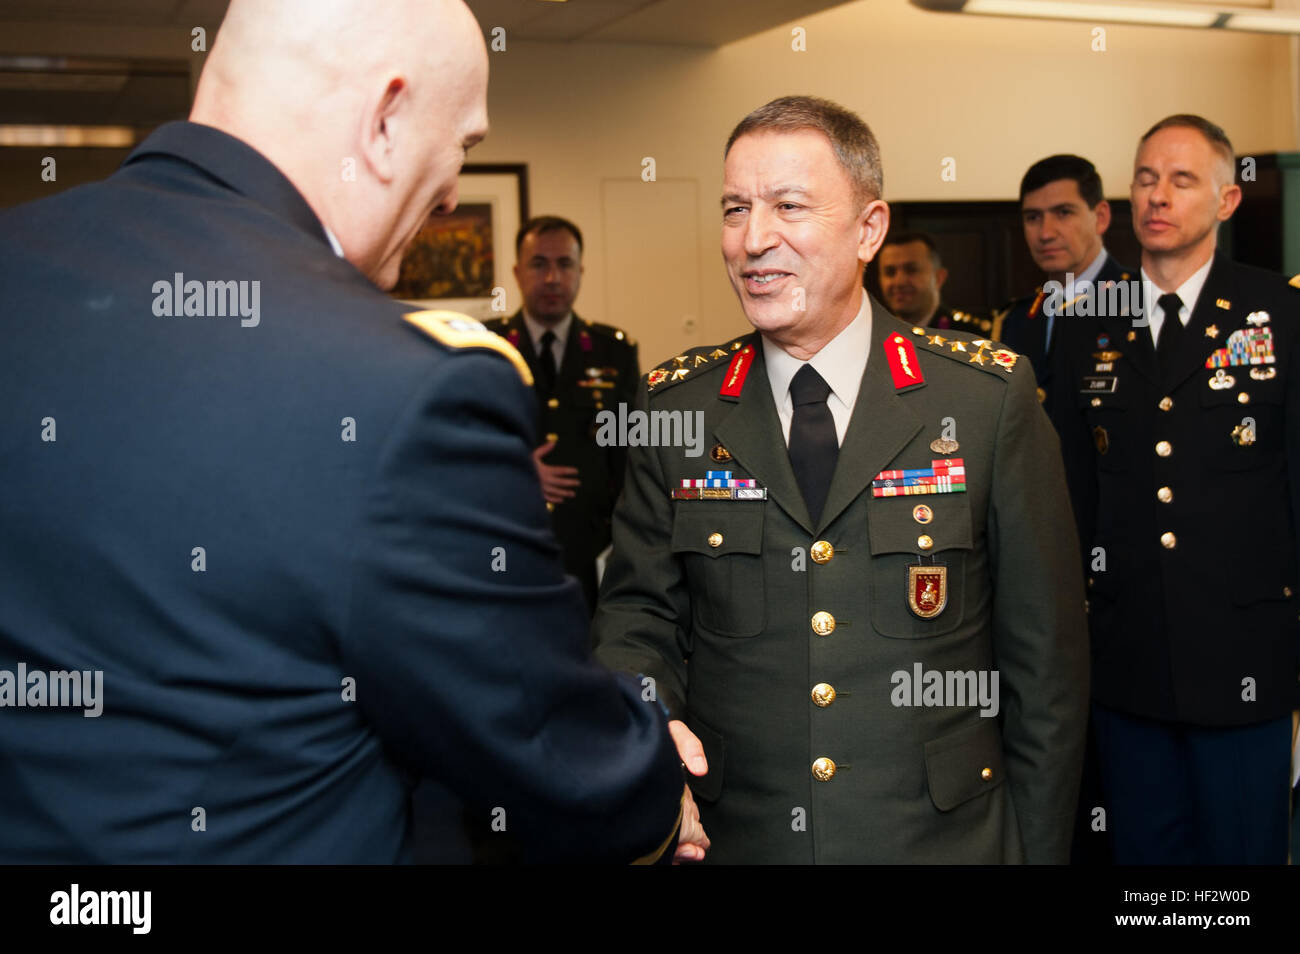 U.S. Army Chief of Staff Gen. Ray Odierno greets Gen. Hulusi Akar, Turkish Land Forces commander before conducting an office call at the Pentagon, Arlington, Va., Jan. 27, 2015. (U.S. Army photo by Staff Sgt. Mikki L. Sprenkle/Released) Gen. Hulusi Akar, Turkish Land Forces commander visits with US Army Chief of Staff Stock Photo